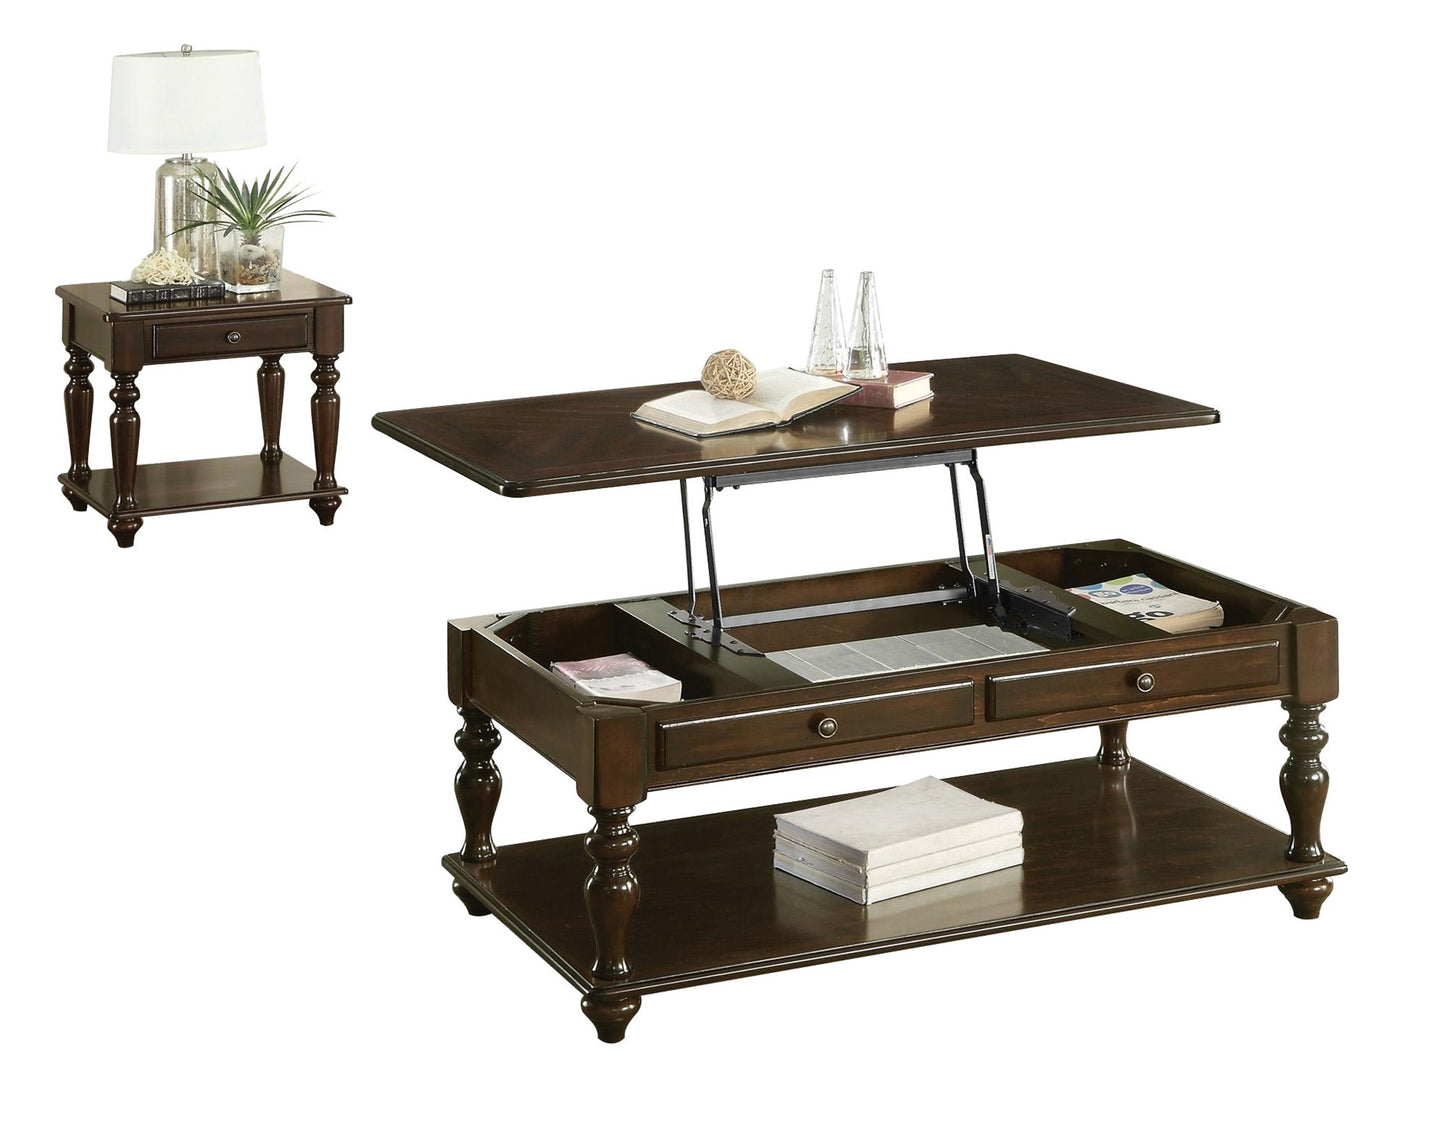 Homelegance Lovington 2PC Occasional Set Lift Top Cocktail Table on Casters, 1 End Table in Espresso